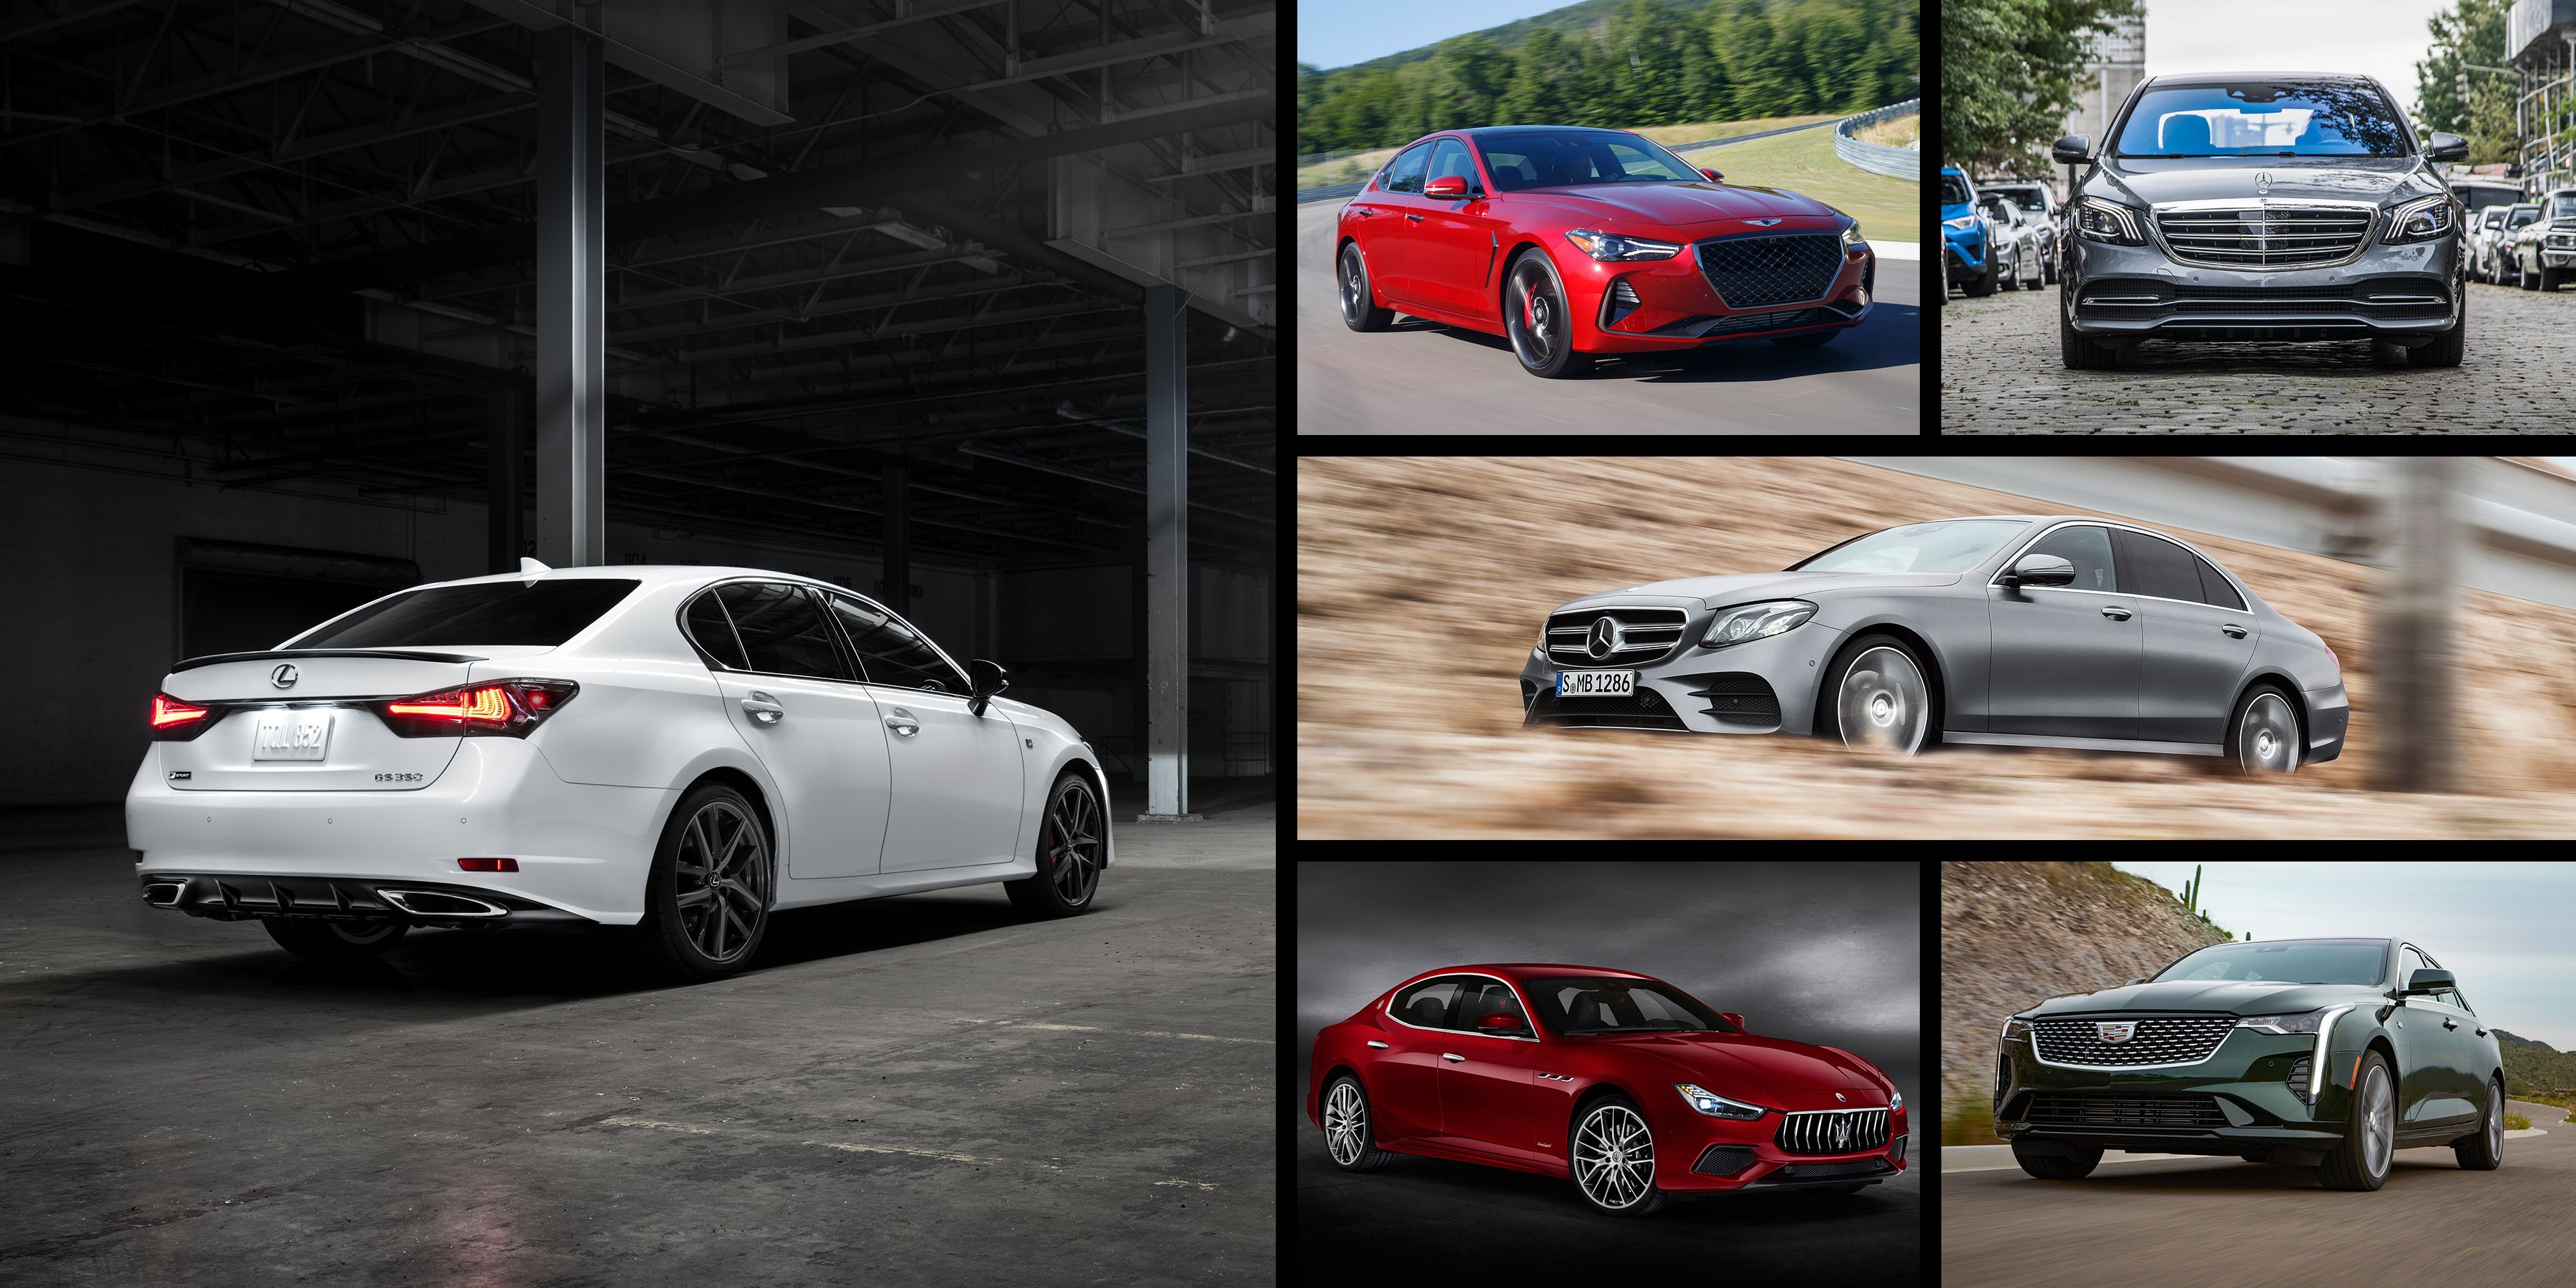 25 Rwd Sedans To Replace That Lexus Gs You Wanted